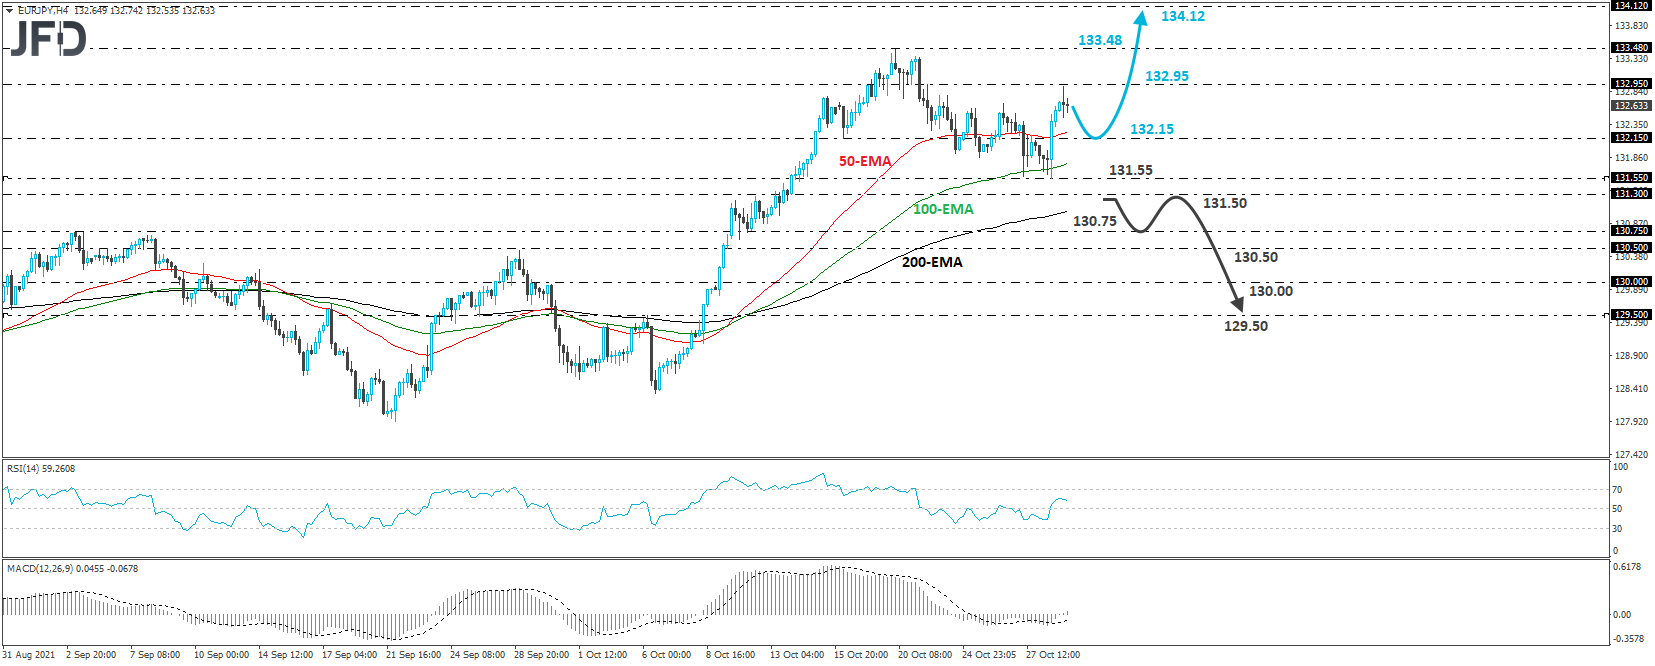 EUR/JPY 4-hour chart technical analysis.